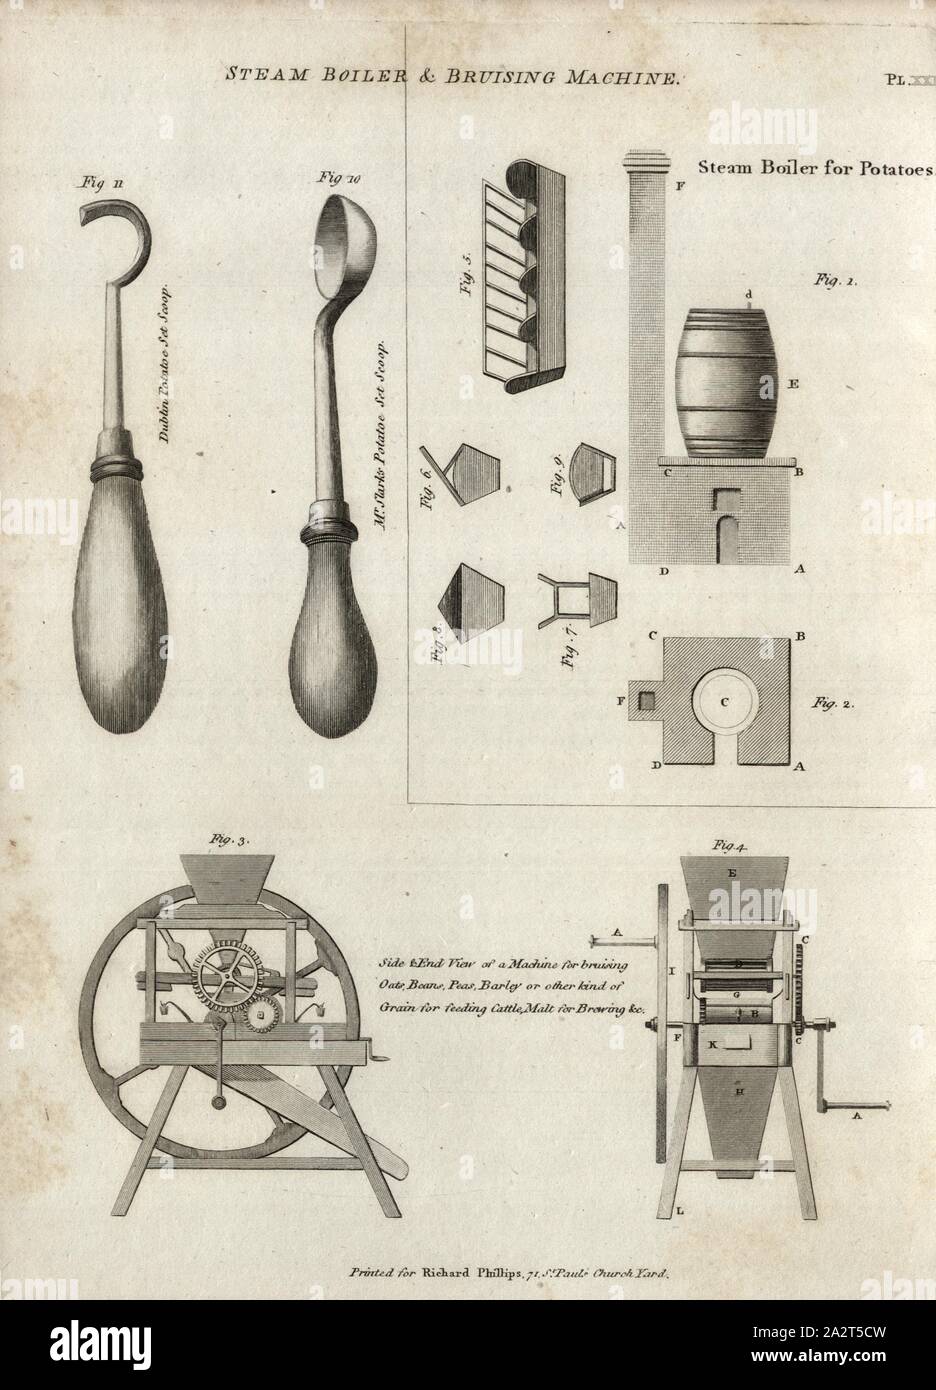 Steam Boiler and Bruising Machine, Boiler and Stamper, Fig. 23, Pl. XXIII, after p. 64, R.W. Dickson: Practical agriculture, or, a complete system of modern husbandry: with the methods of planting, and the management of live stock. Bd. 1. London: printed for Richard Phillips; by R. Taylor and Co., 1805 Stock Photo